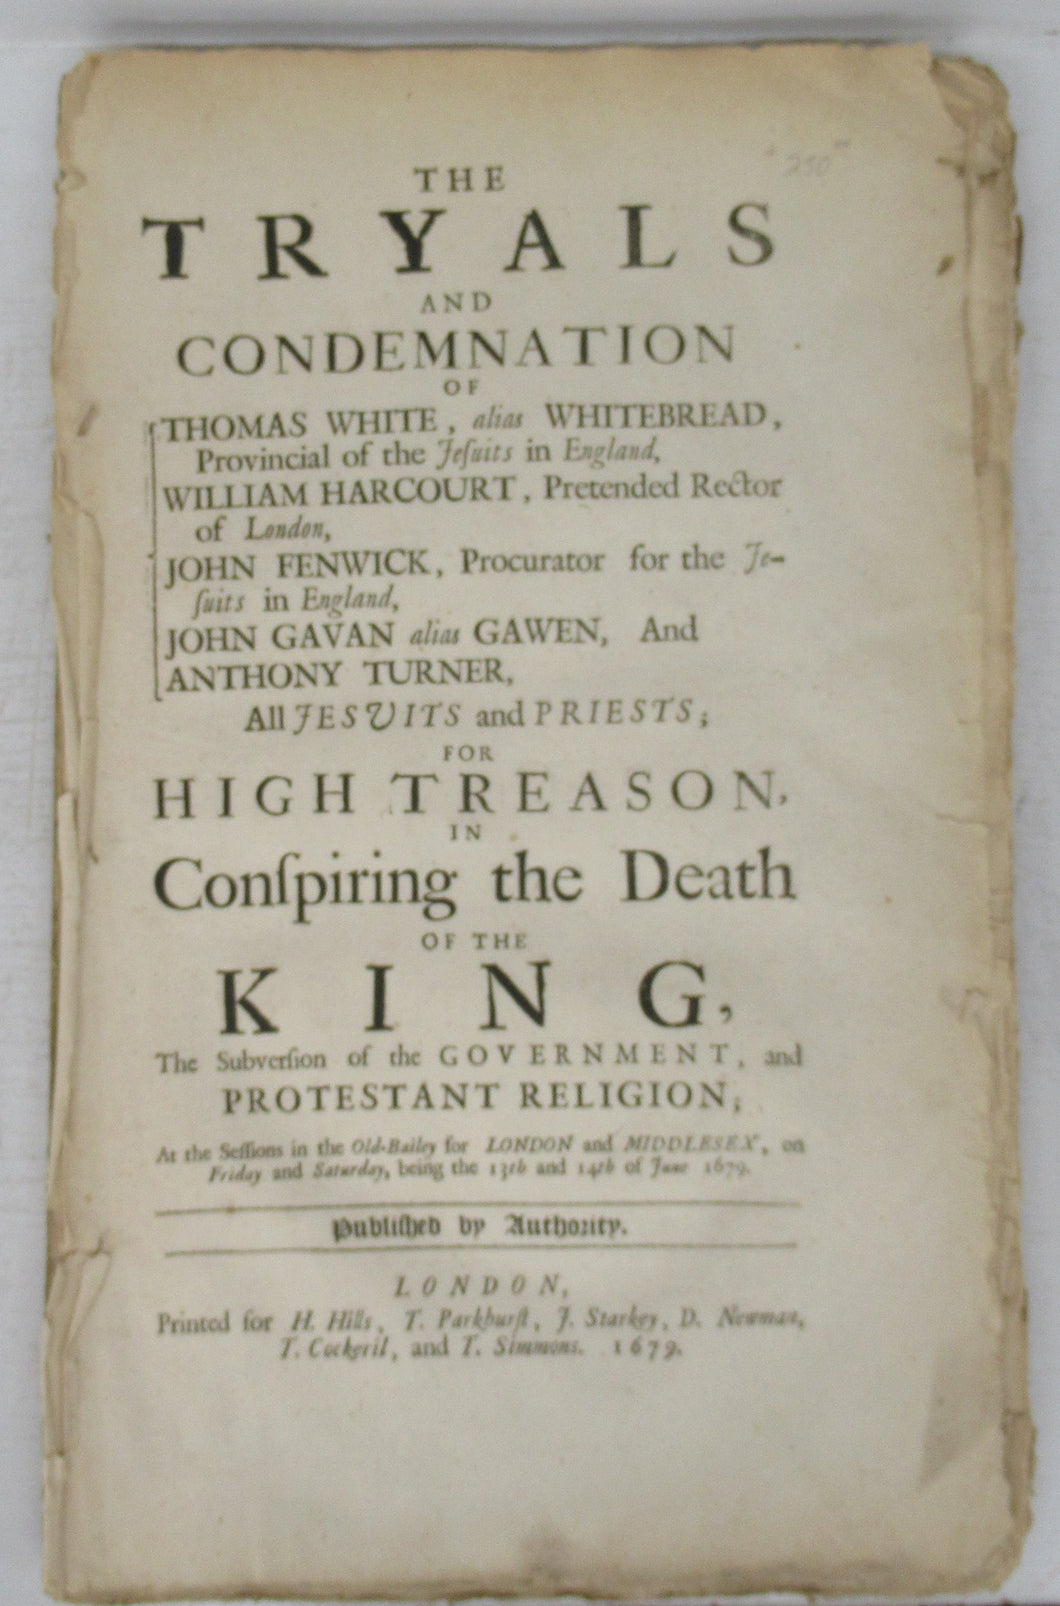 The Tryals and Condemnation of Thomas White, alias Whitebread, Provincial of the Jesuits in England, William Harcourt, Pretended Rector of London, John Fenwick, Procurator for the Jesuits in England, John Gavan alias Gawen, And Anthony Turner,